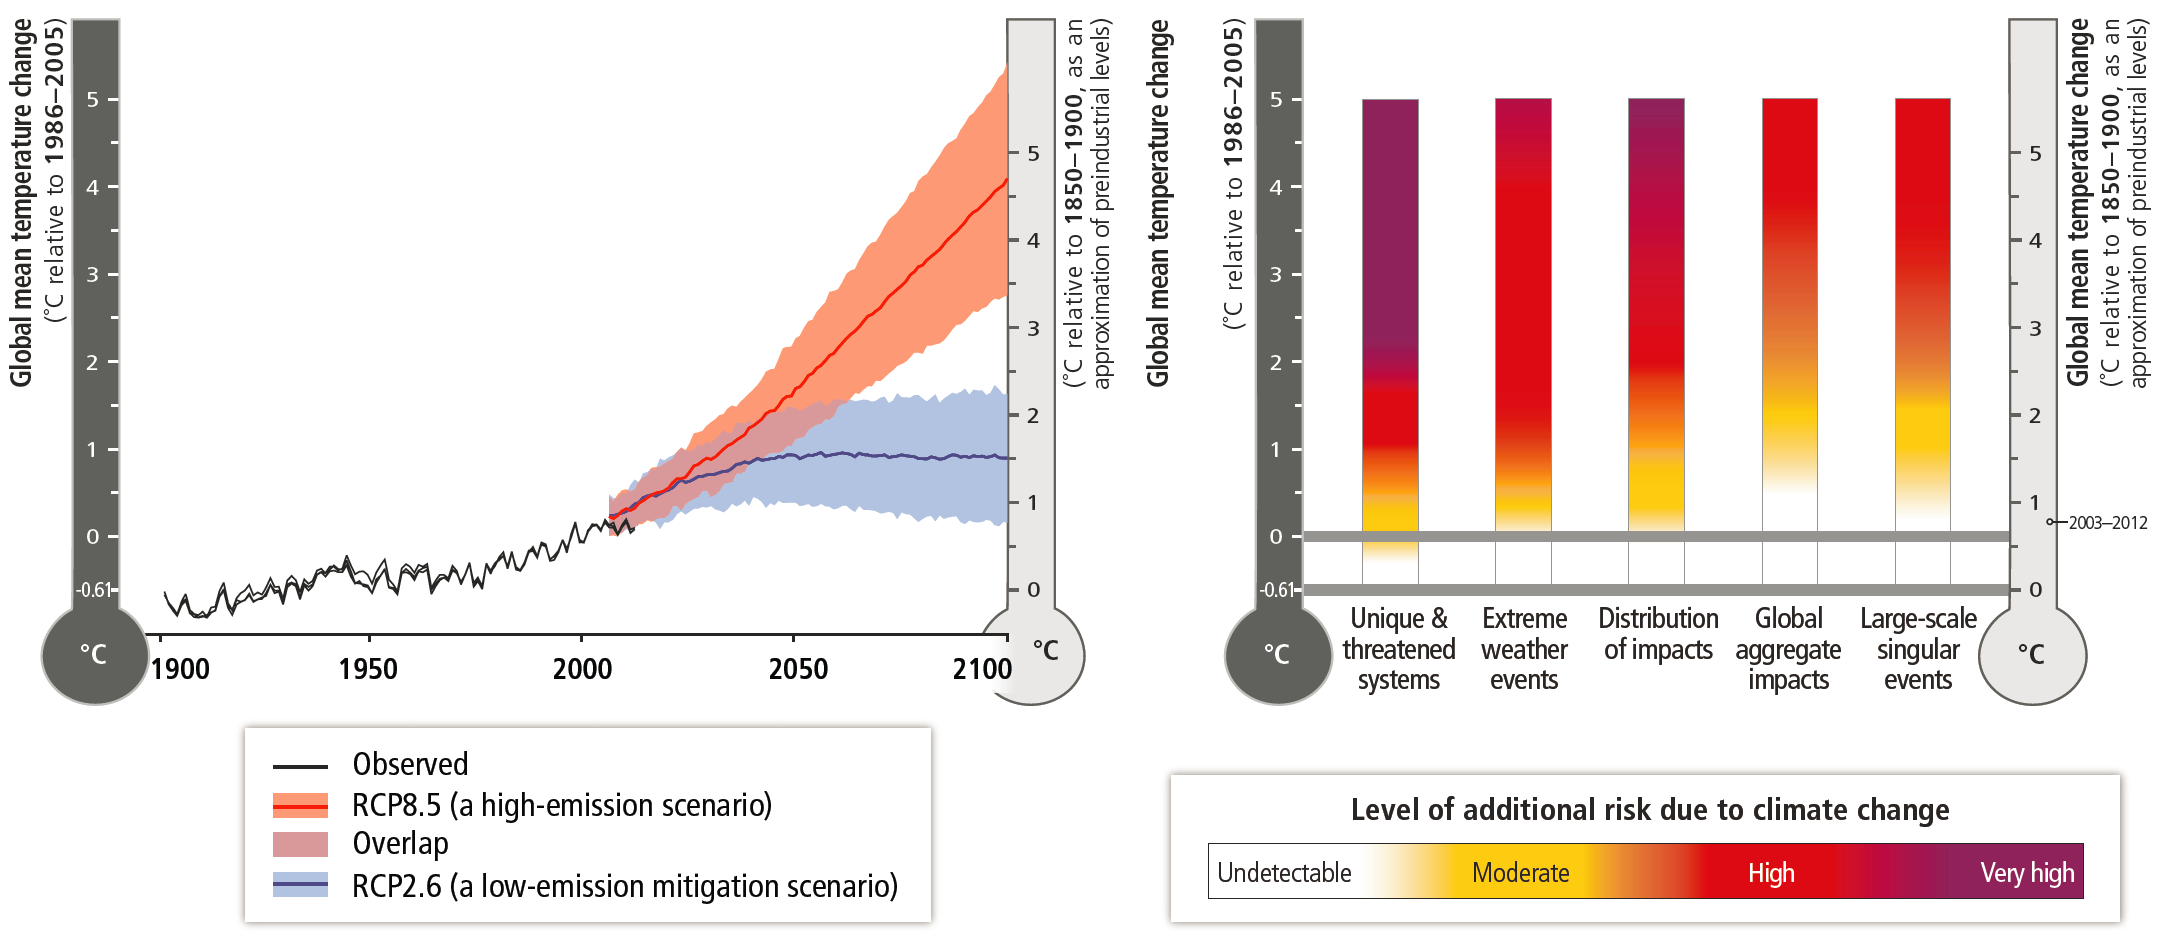 Risk of climate-related impacts results from the interaction of climate-related hazards (including hazardous events and trends) with the vulnerability and exposure of human and